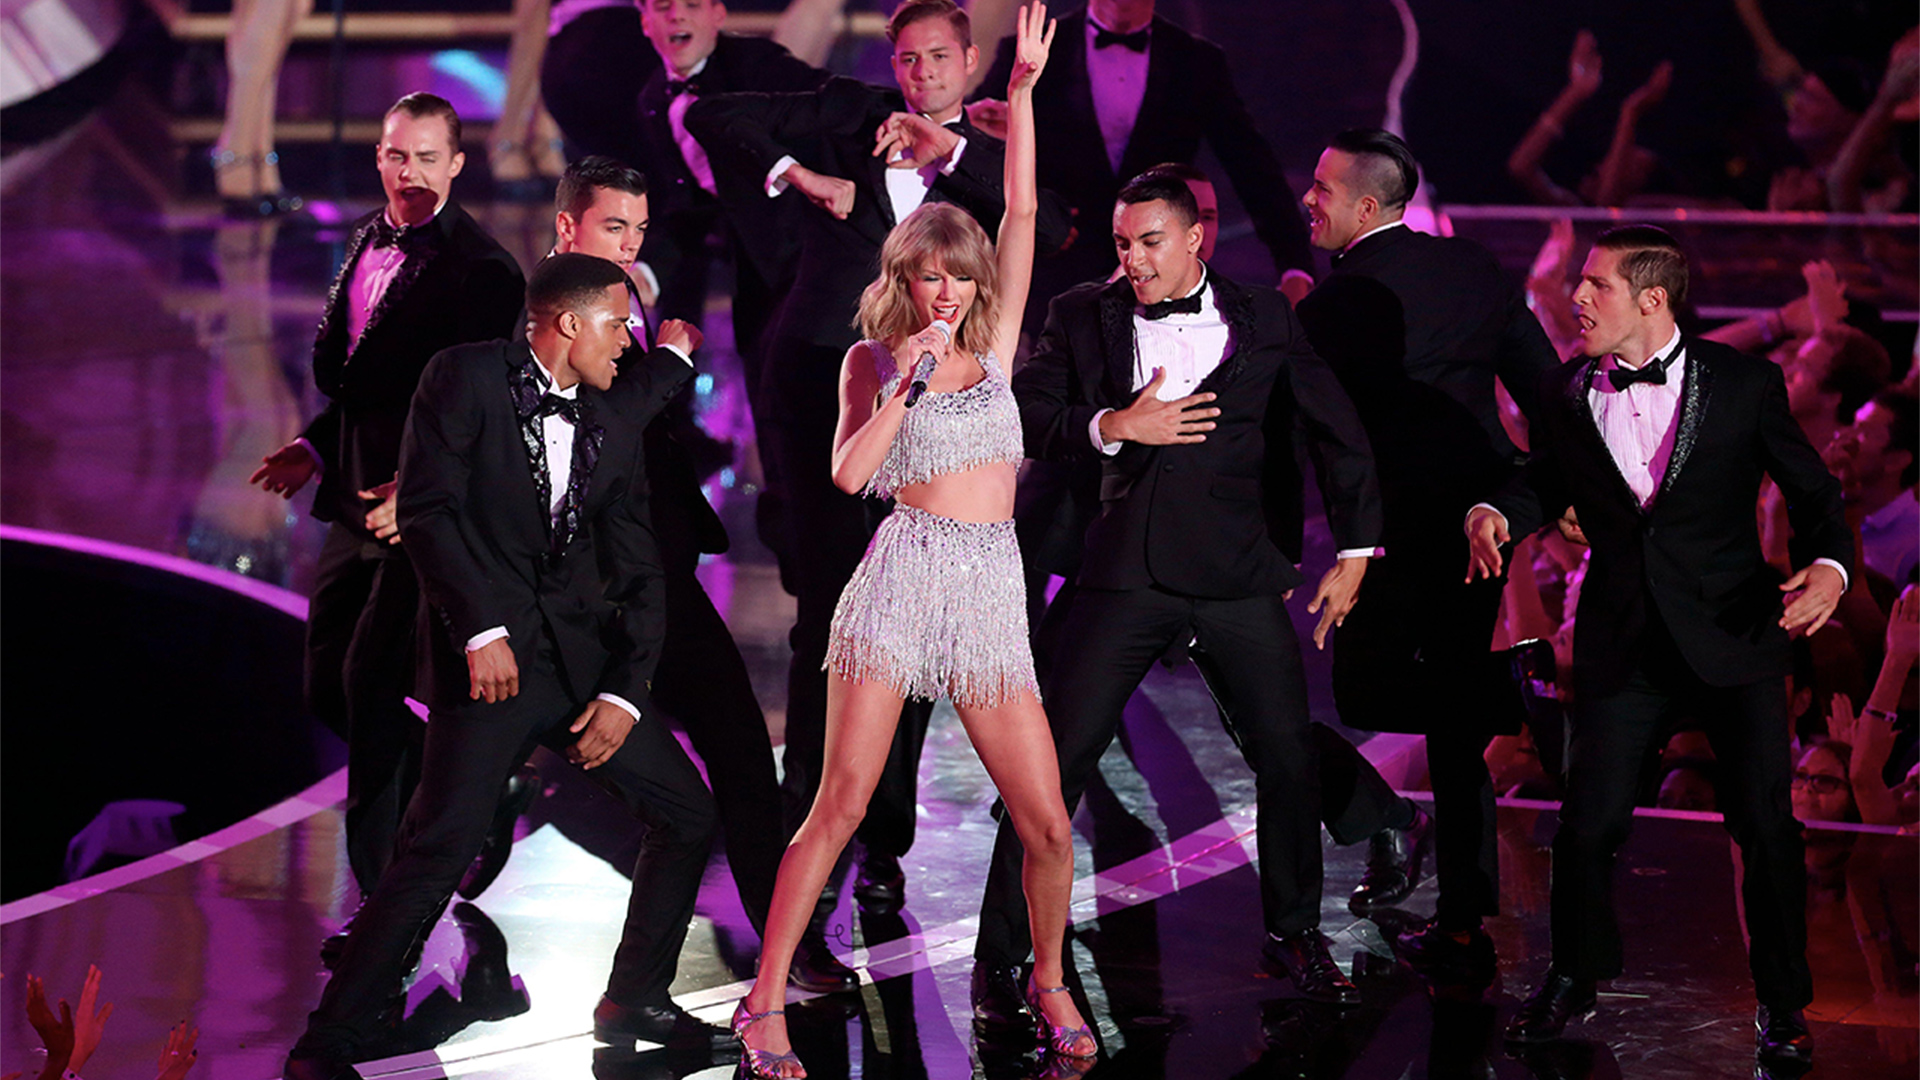 Taylor Swift performing on stage in a silver glittery dress and she is surrounded by male dancers dressed in black tuxedos